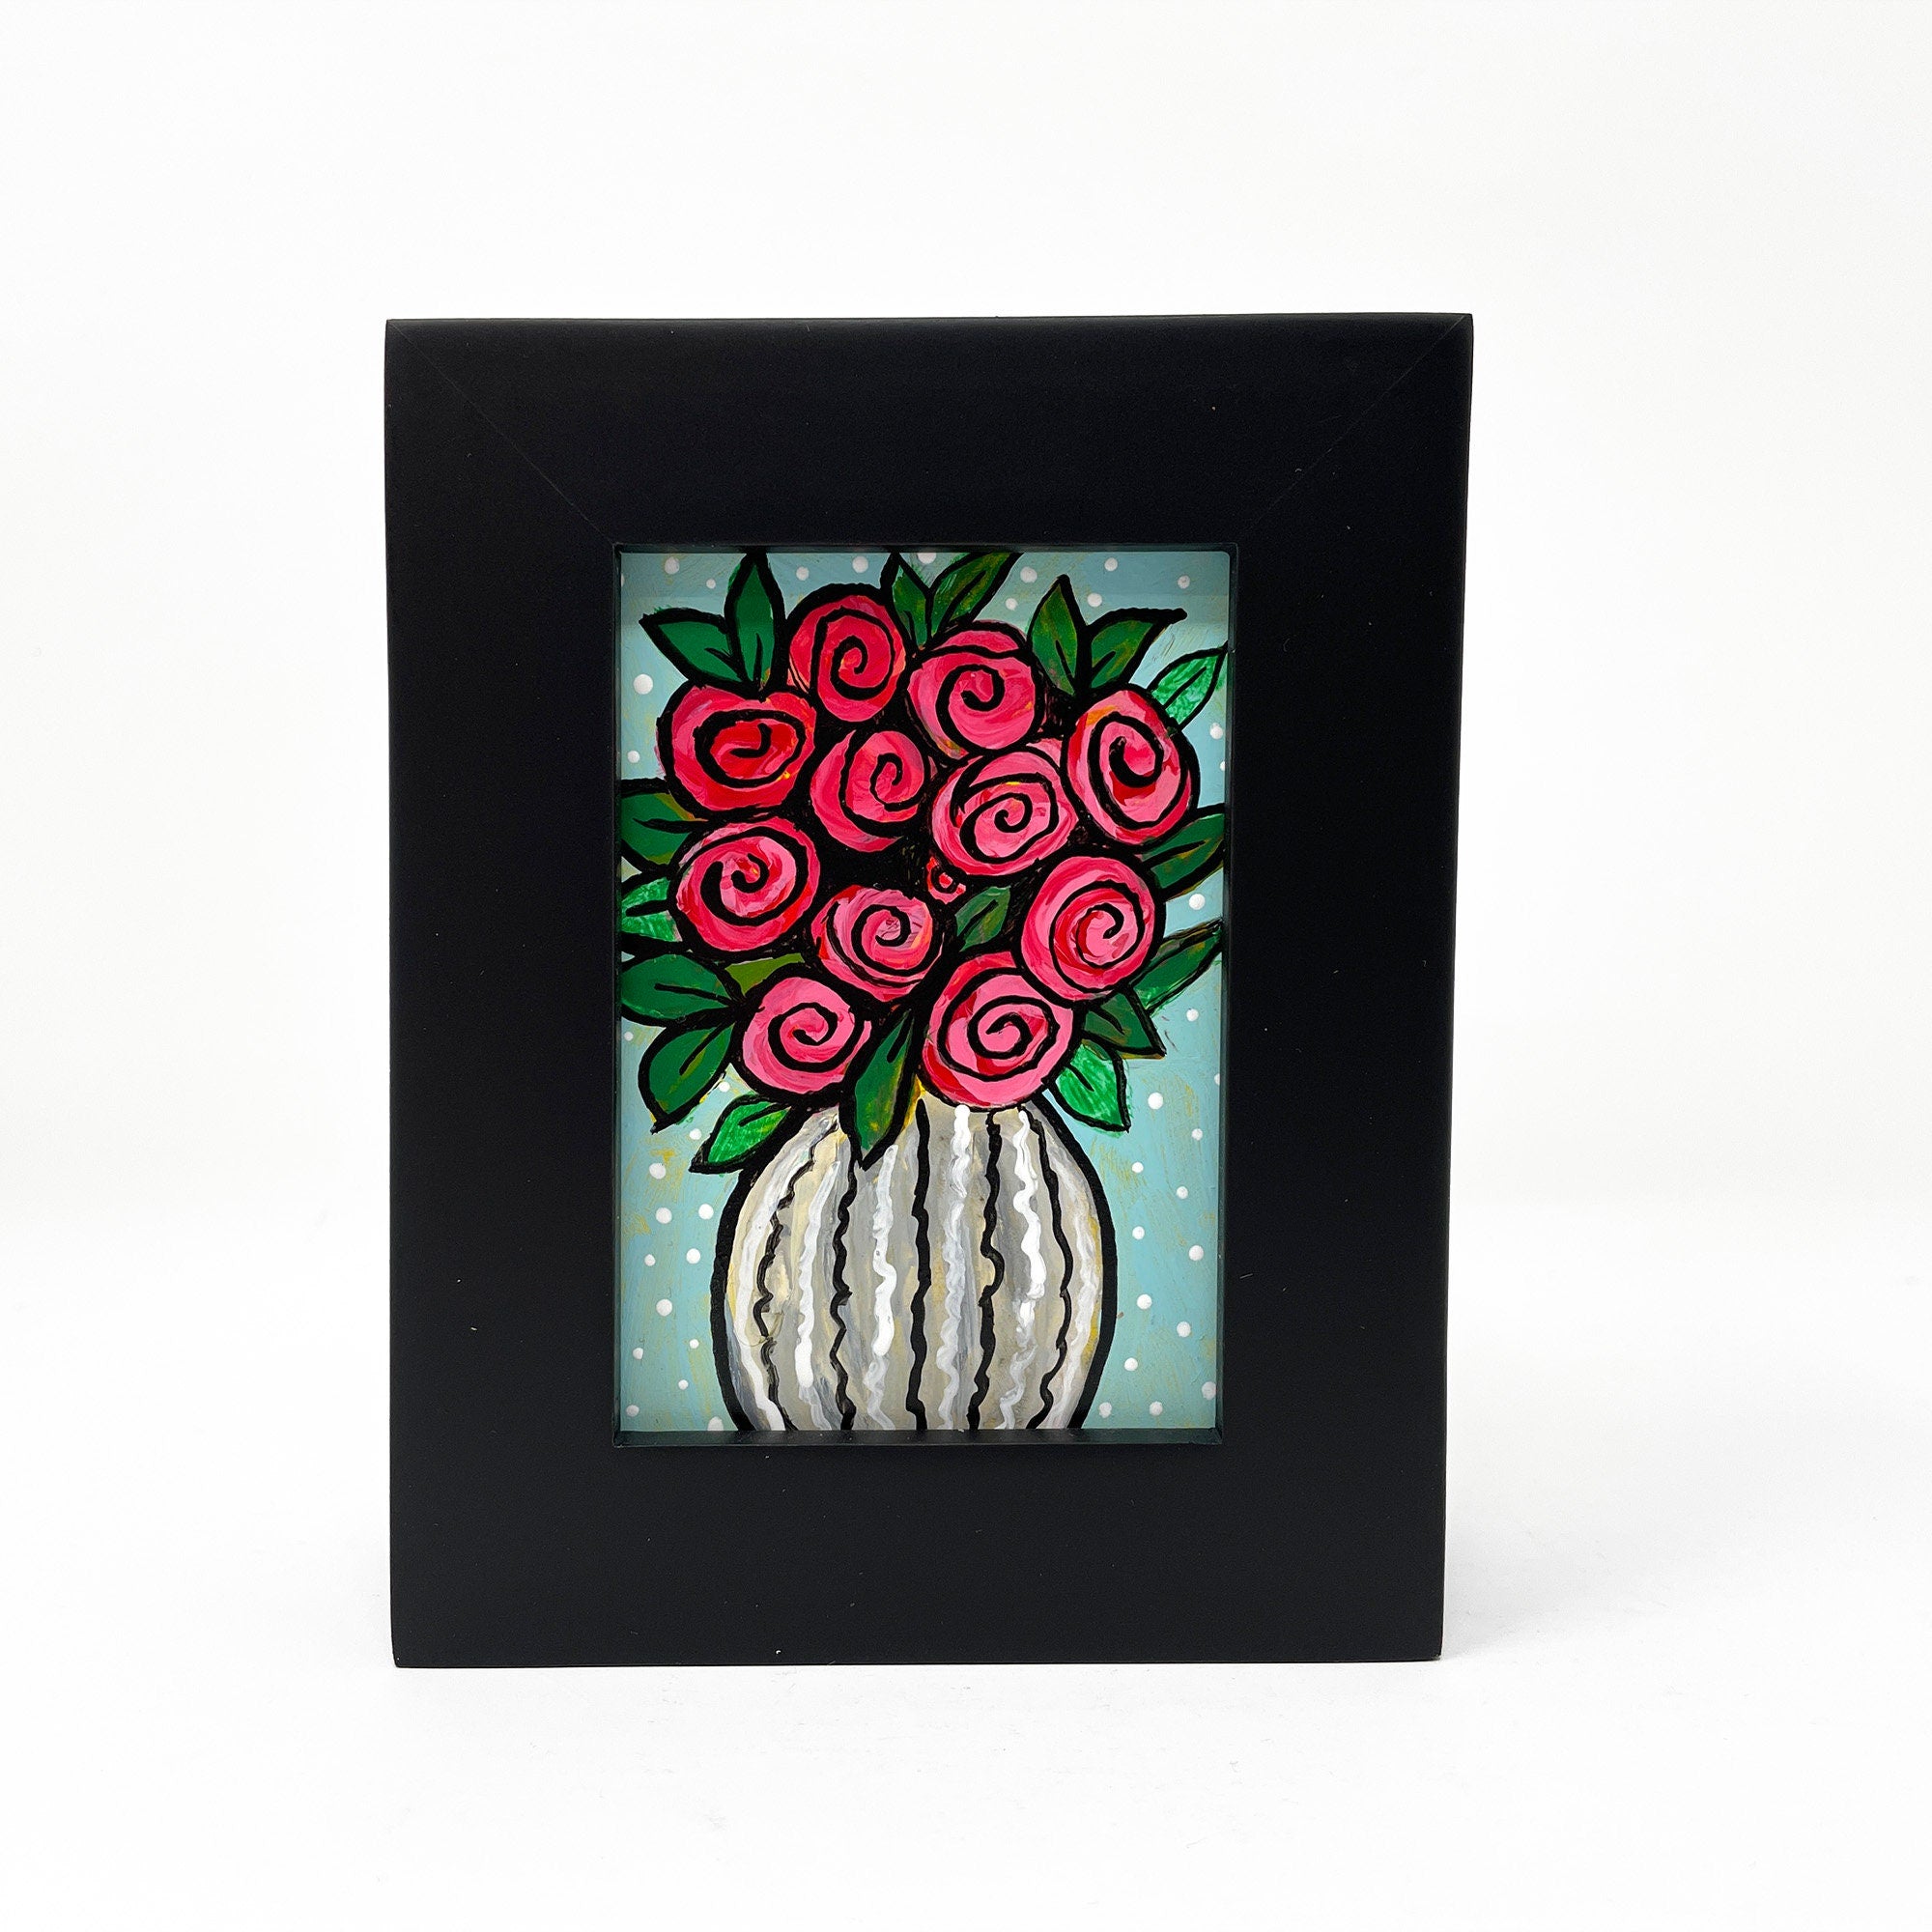 Front view of Vase of Roses painting on white background - White striped vase with red roses and green leaves. Light blue background with white polka dots.